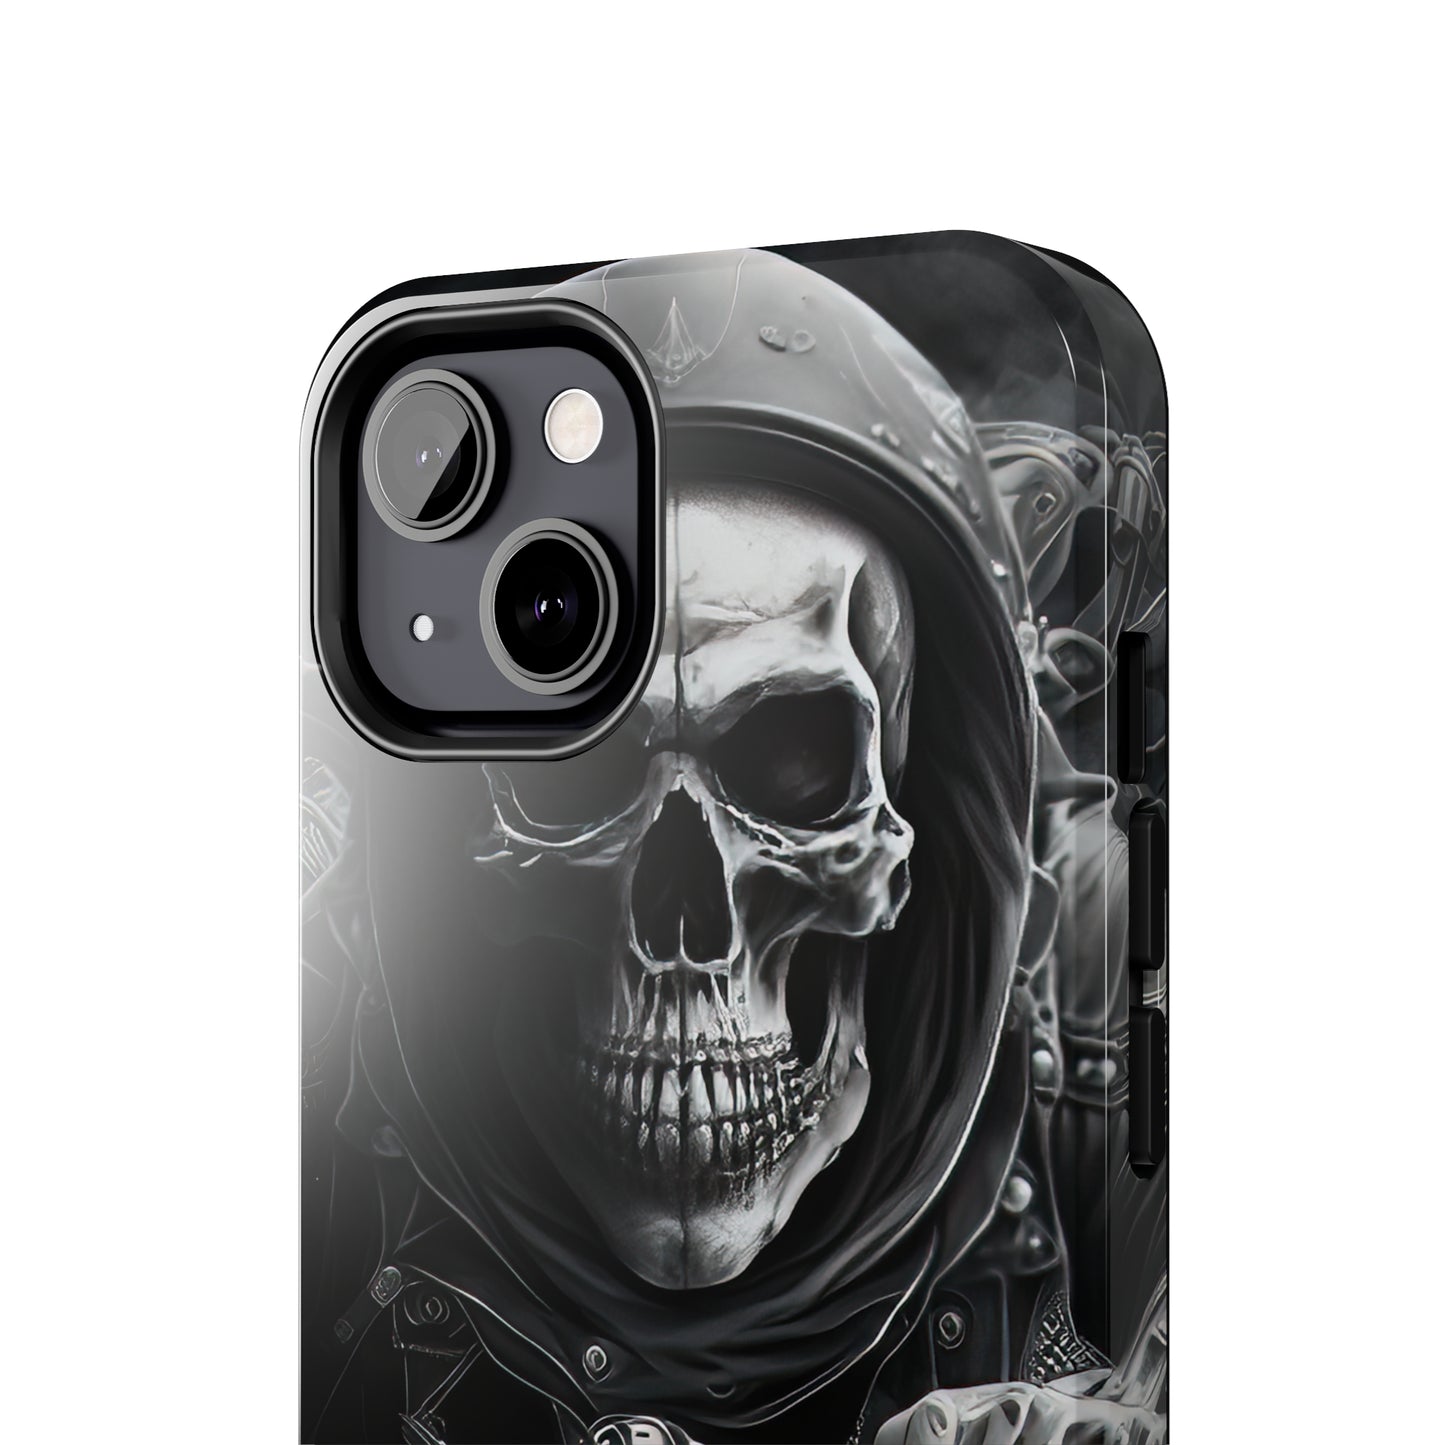 Skull Motorcycle Rider, Ready to Tear Up Road On Beautiful Bike 5 Tough Phone Cases